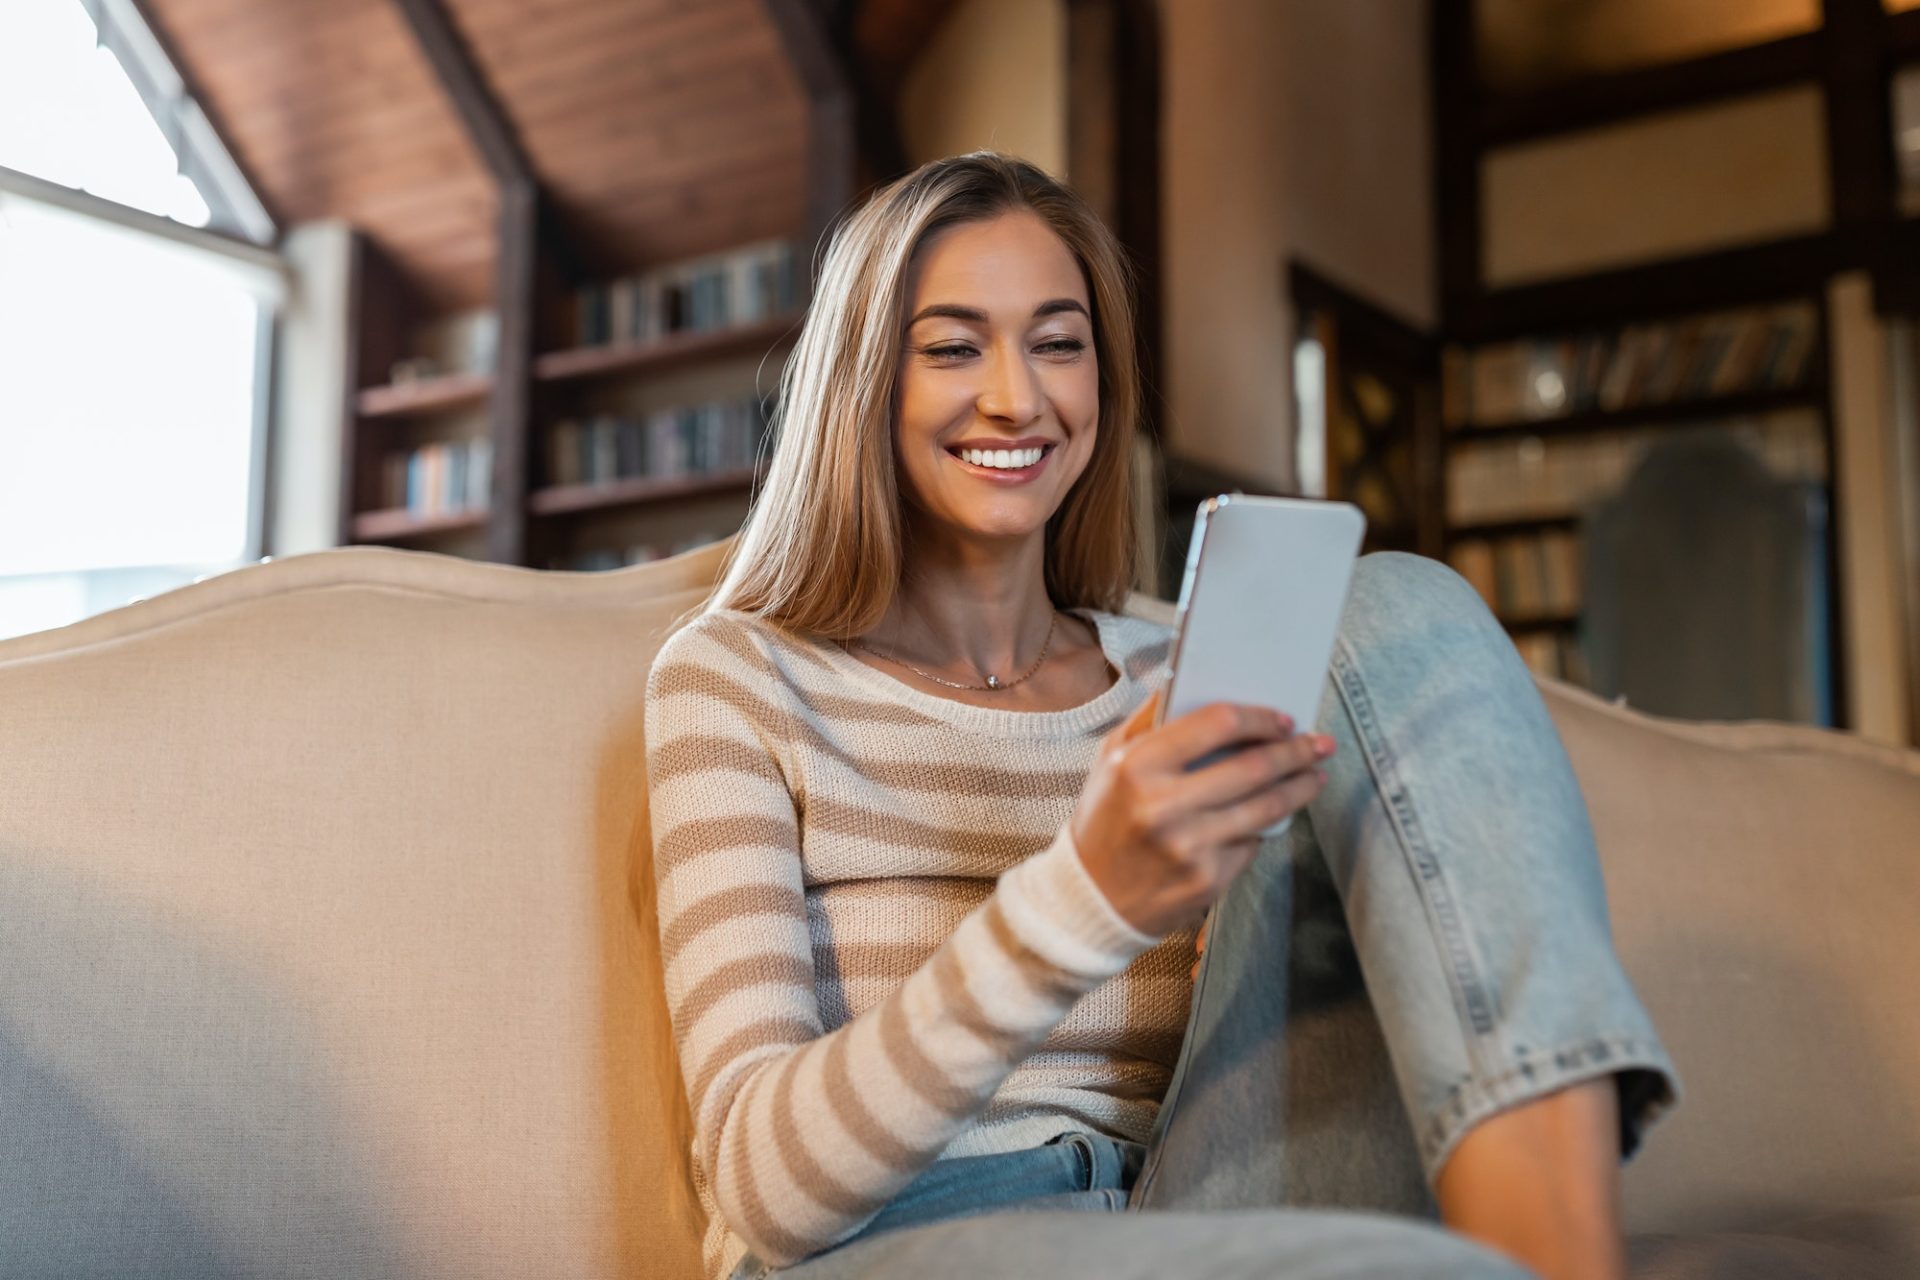 Portrait of smiling woman using smartphone at home